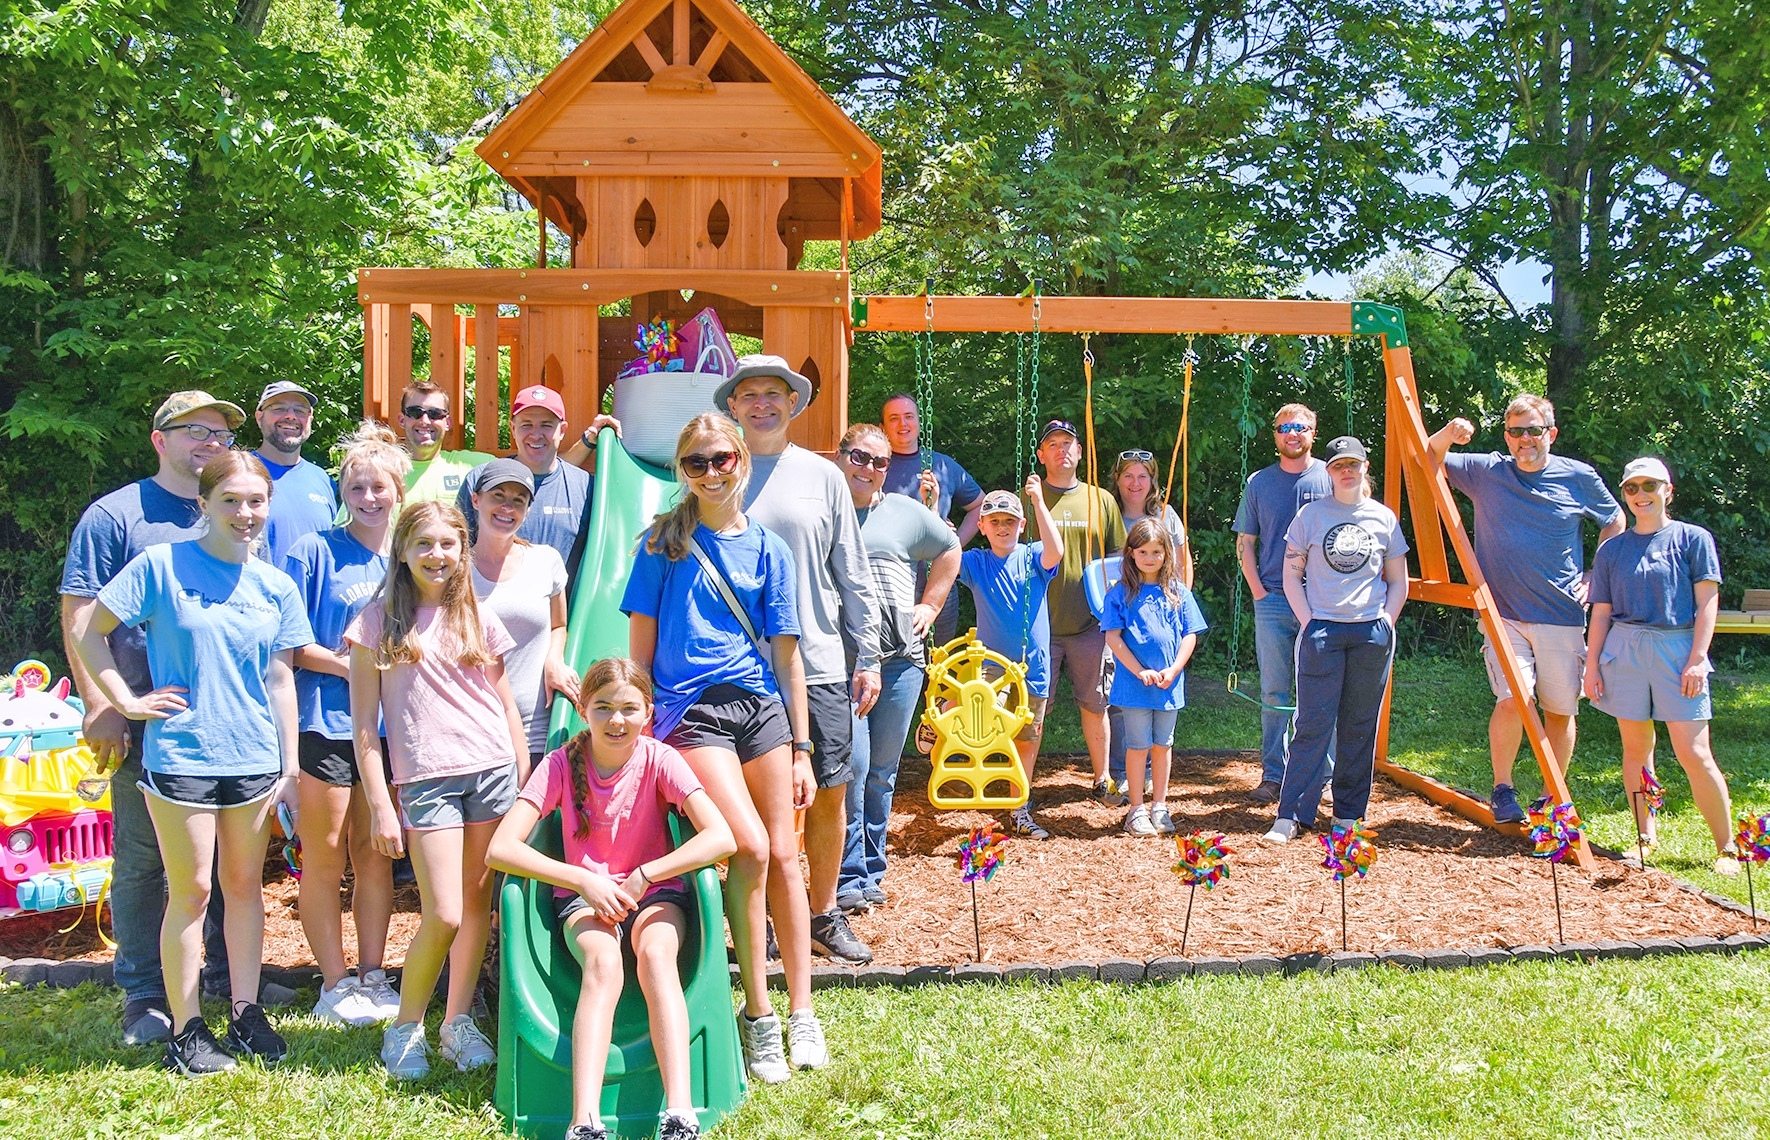 A recent Roc Solid playground build